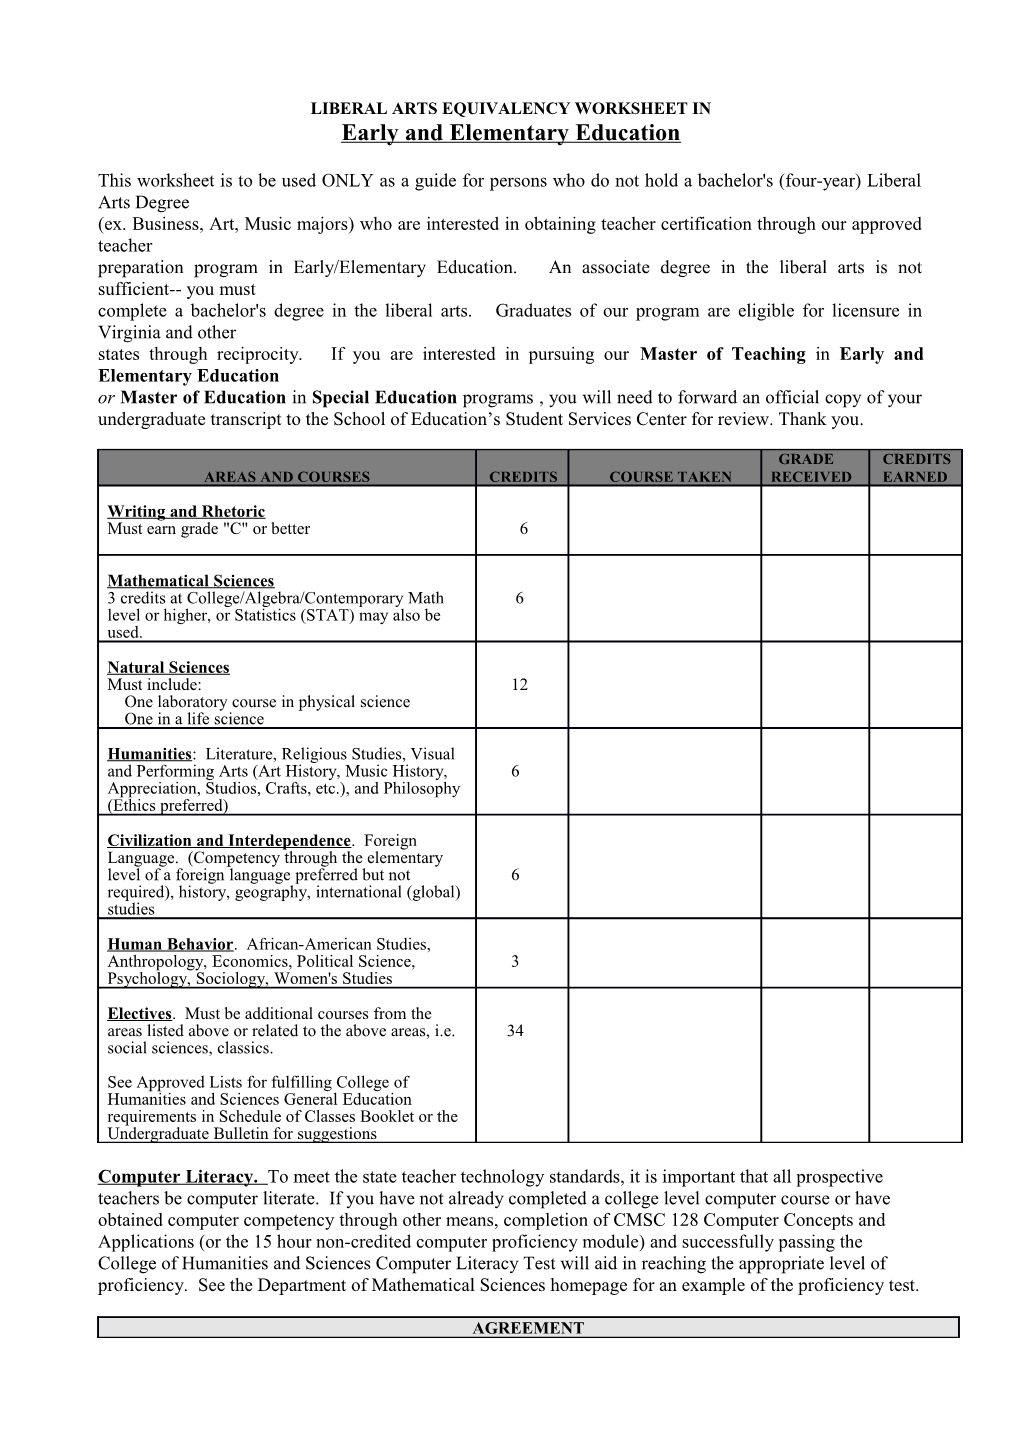 Liberal Arts Equivalency Worksheet In